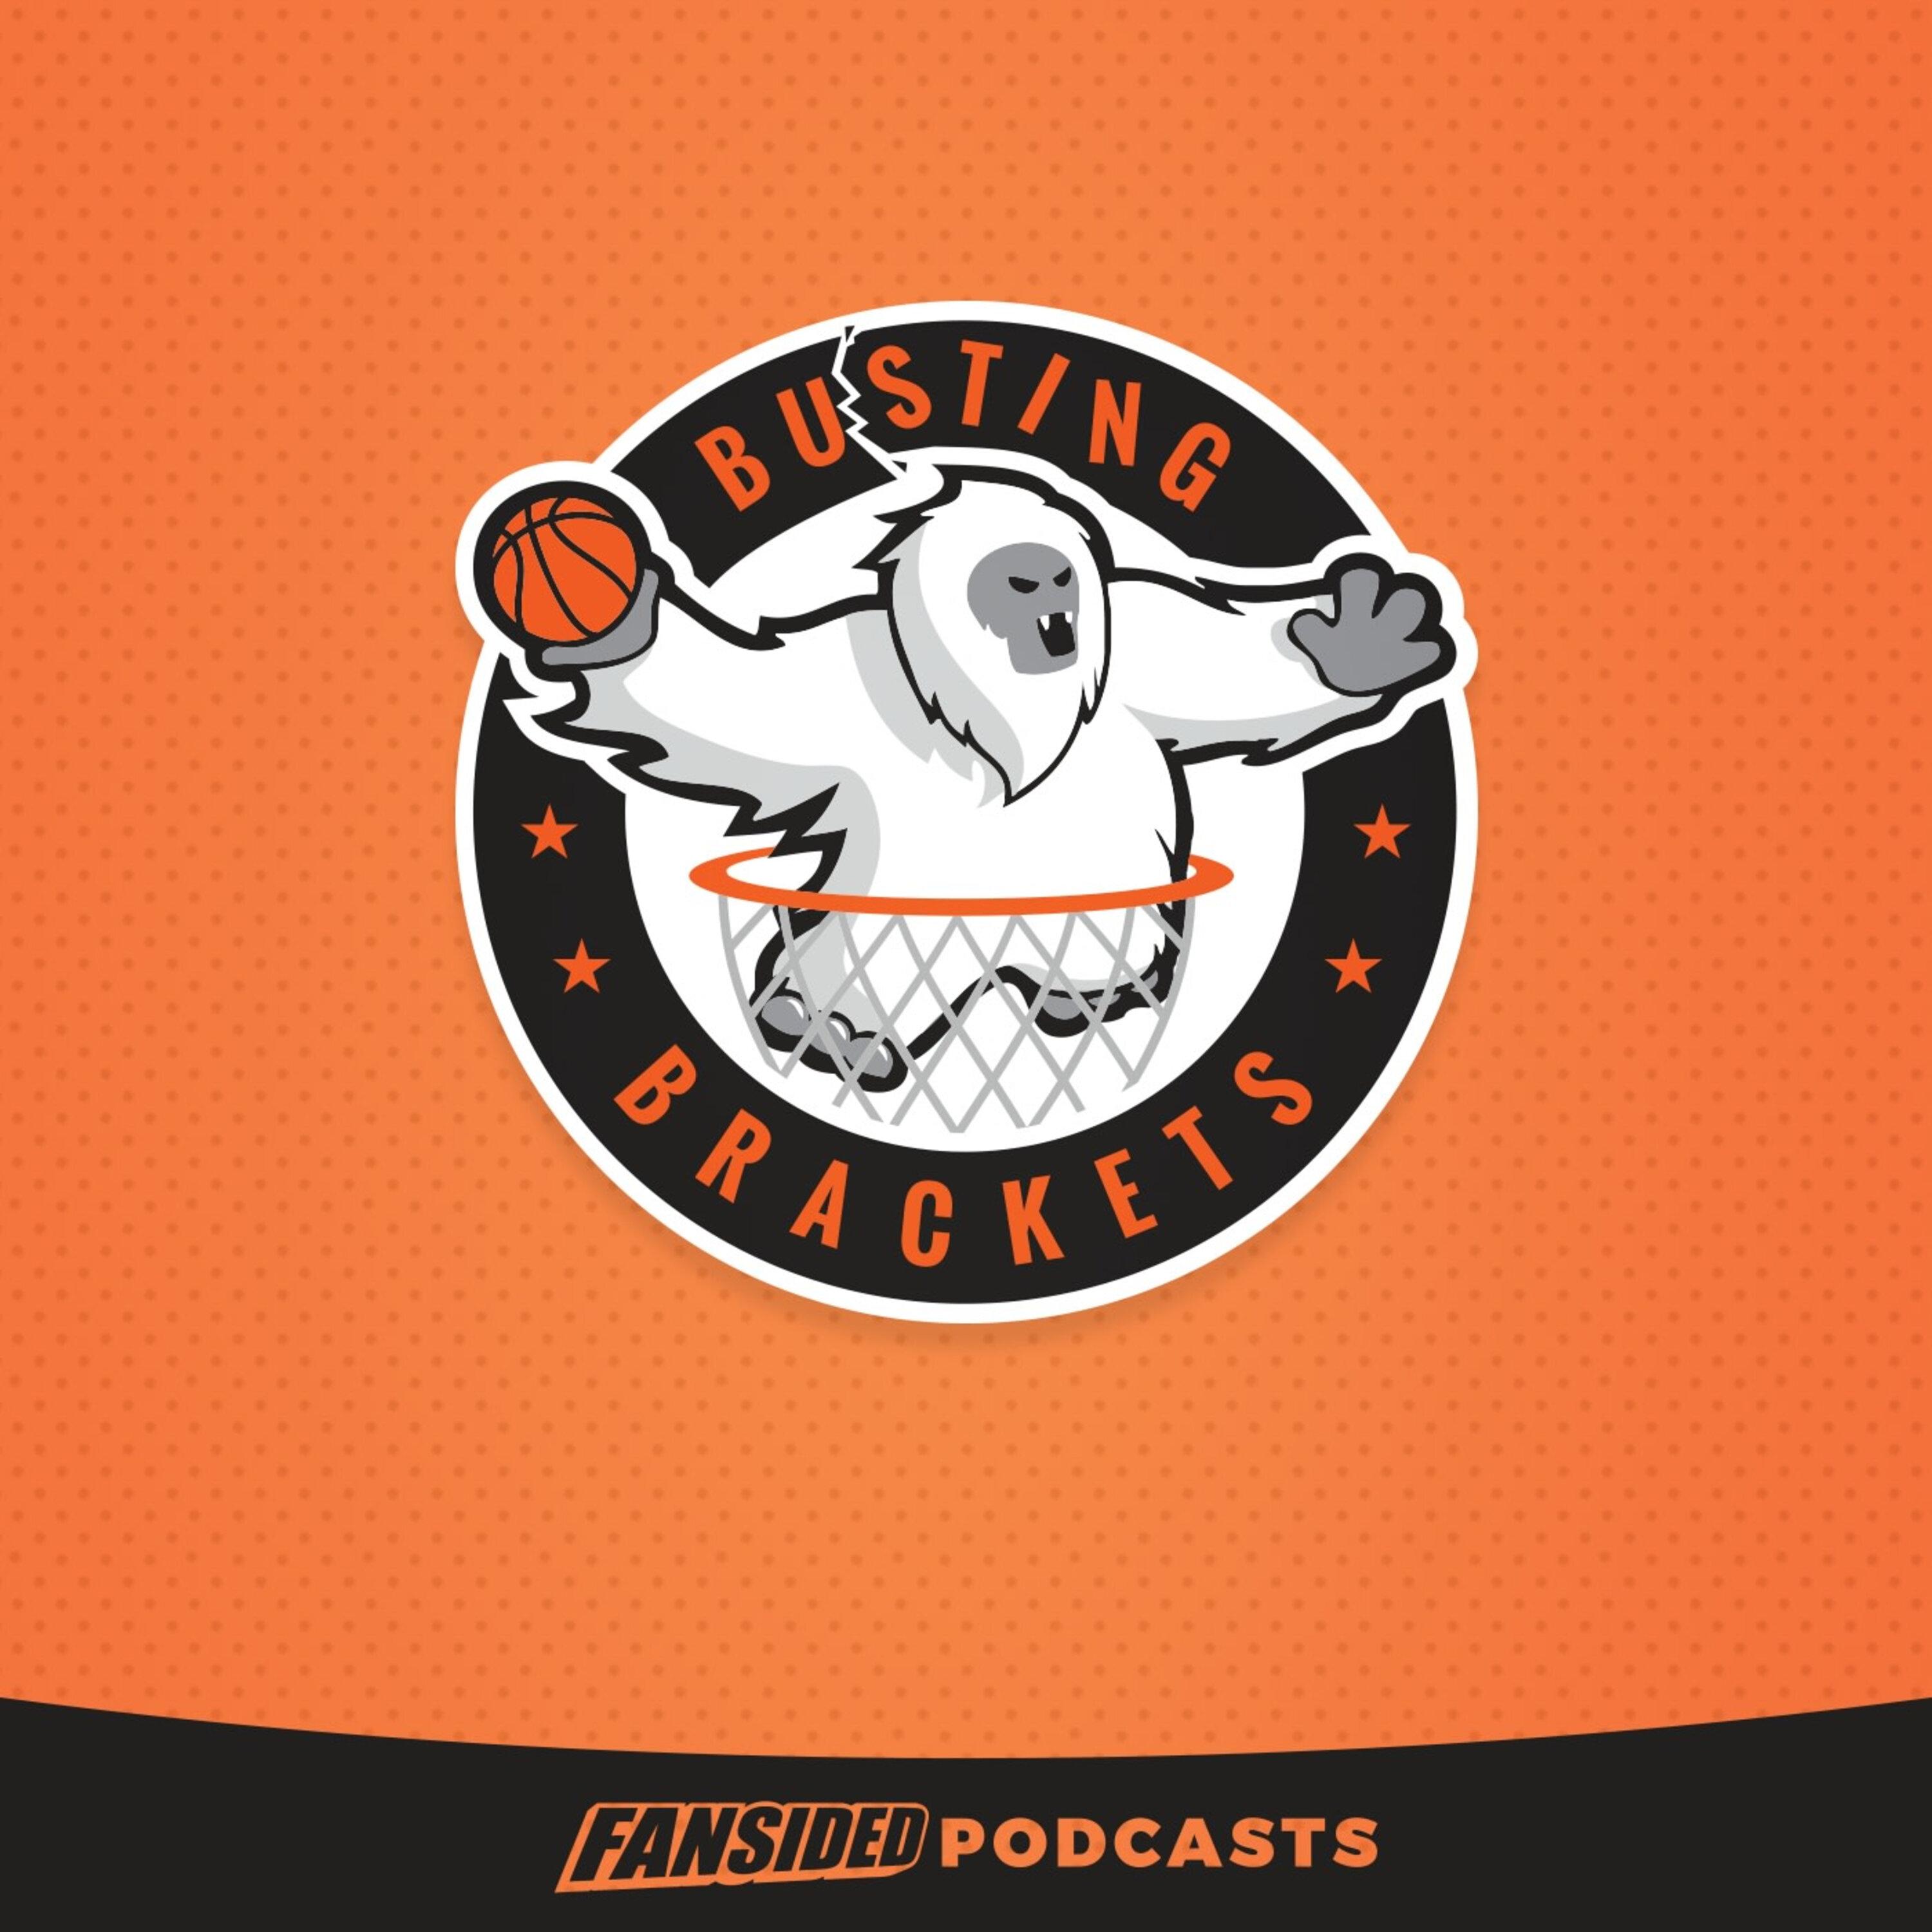 Busting Brackets Podcast on College Basketball